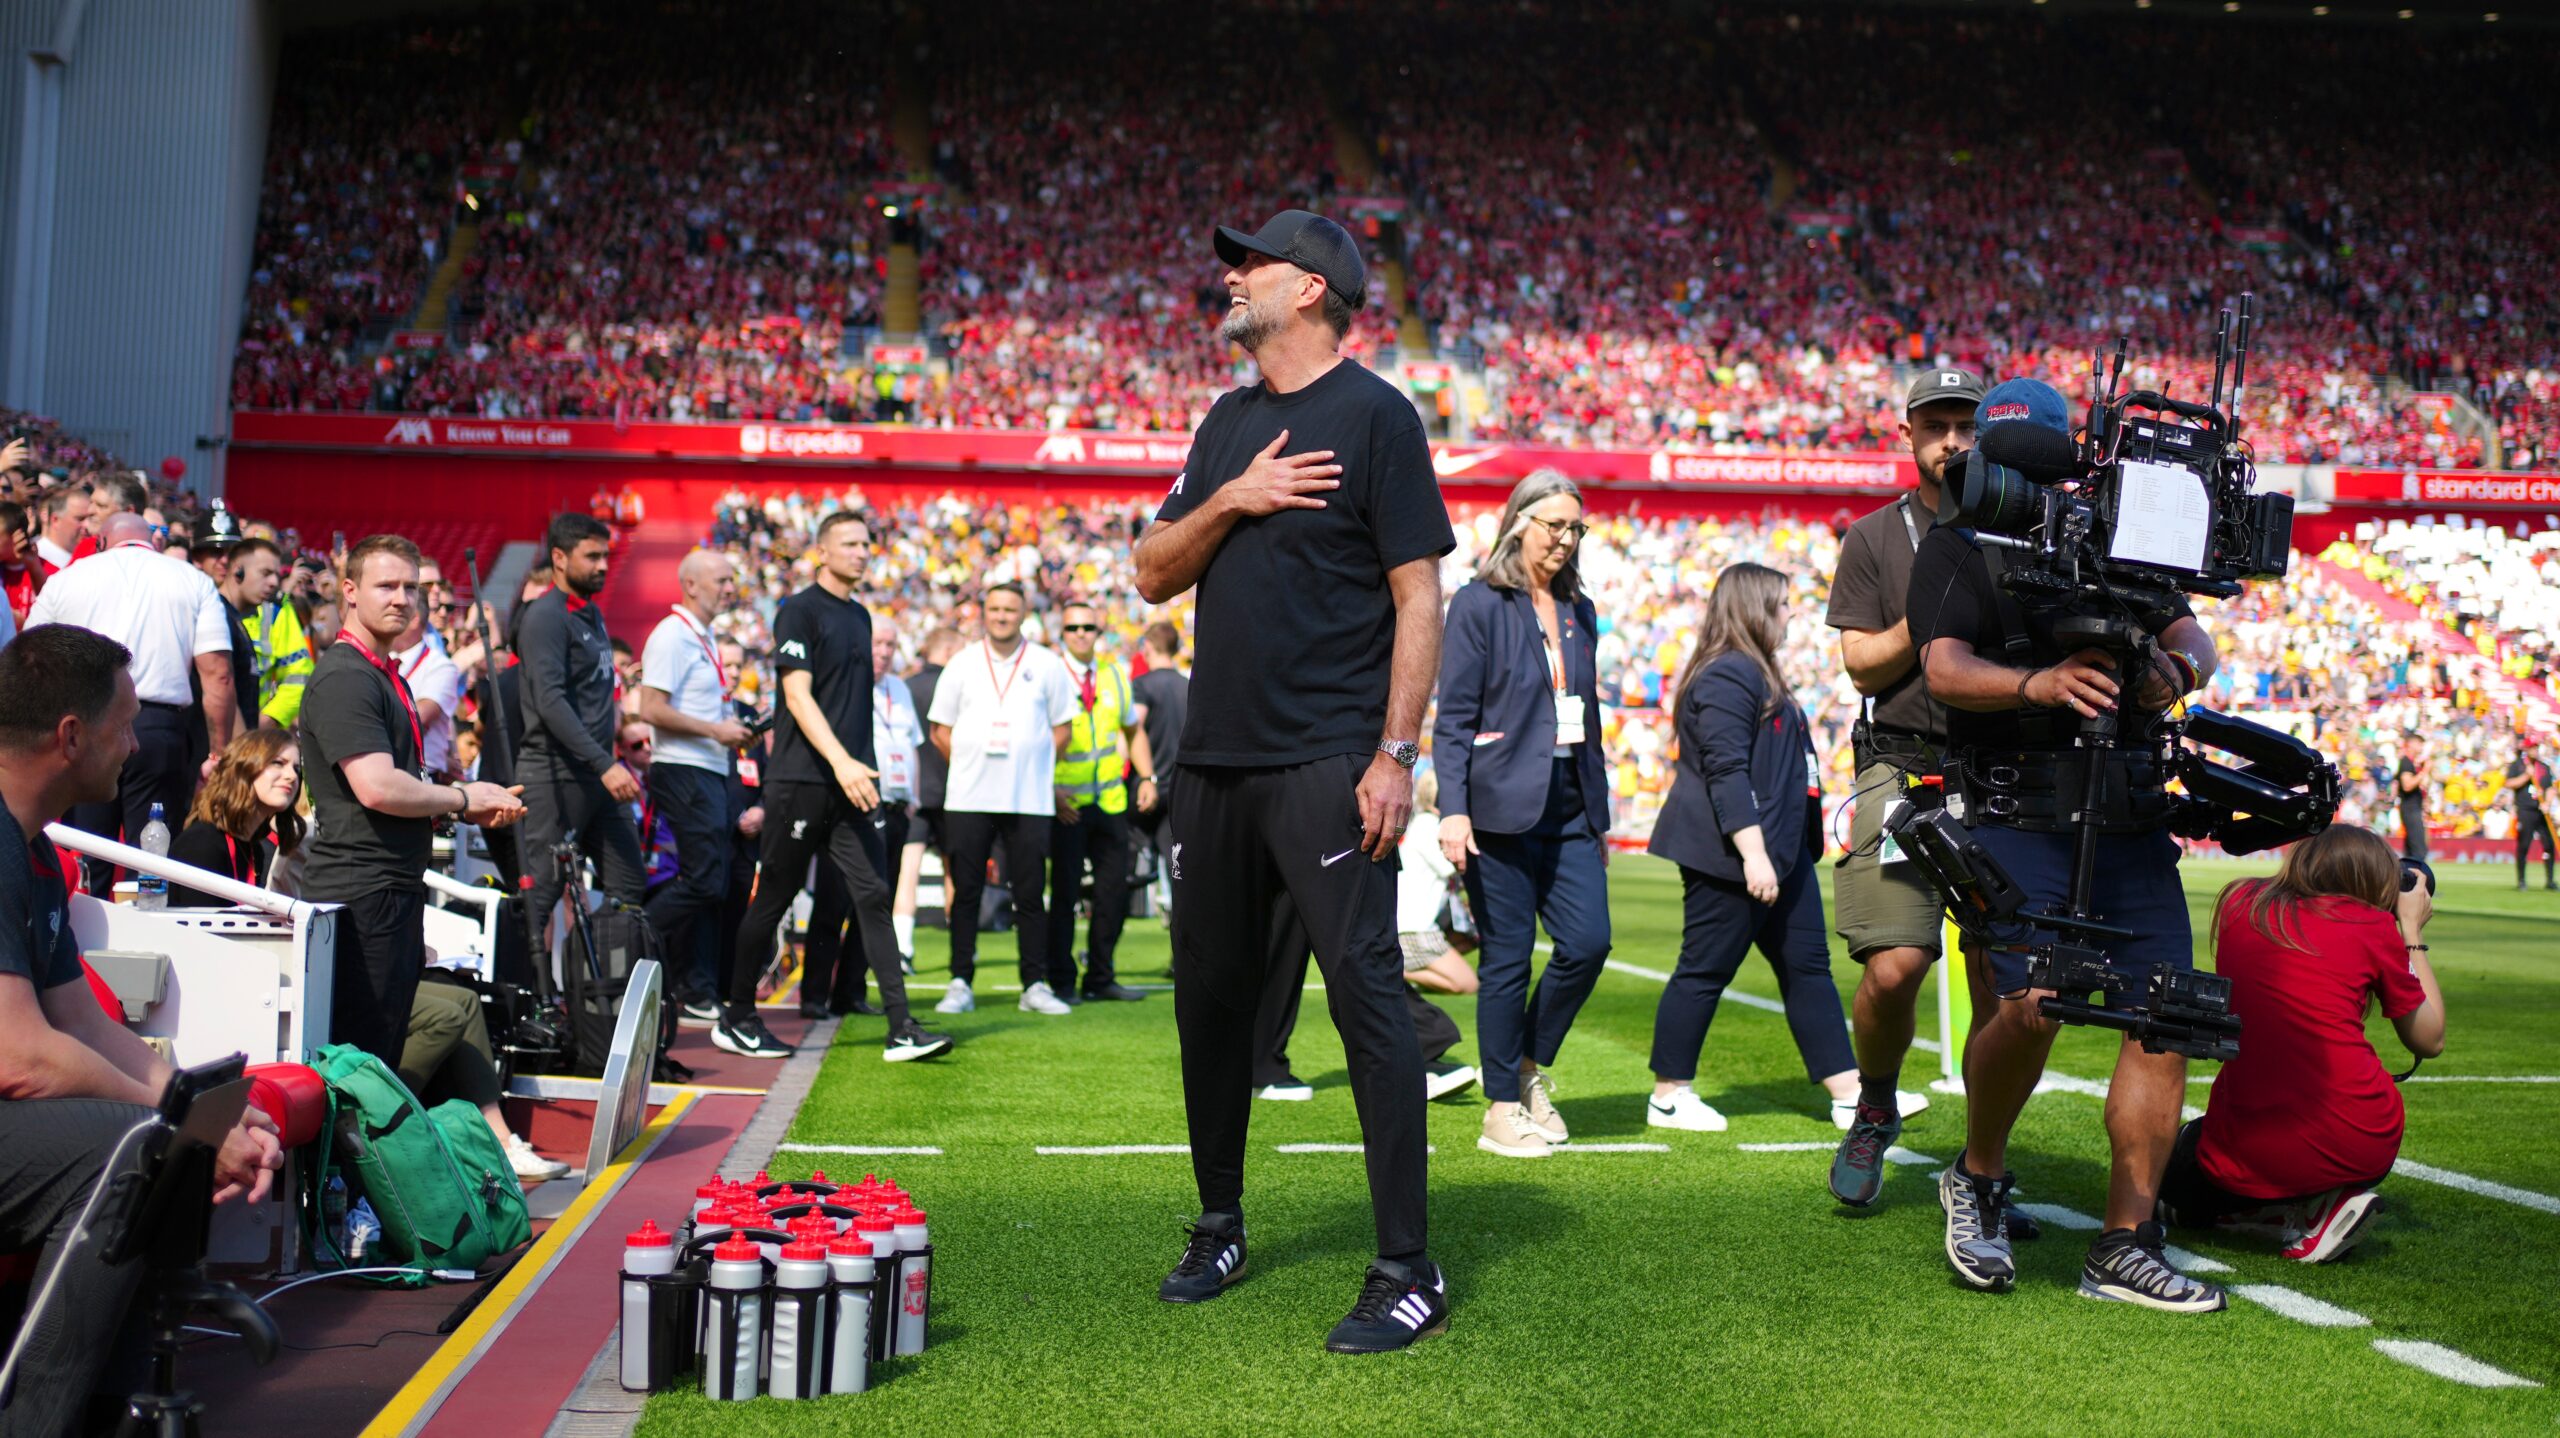 Jurgen Klopp signs off with win in emotionally charged final match as Liverpool manager